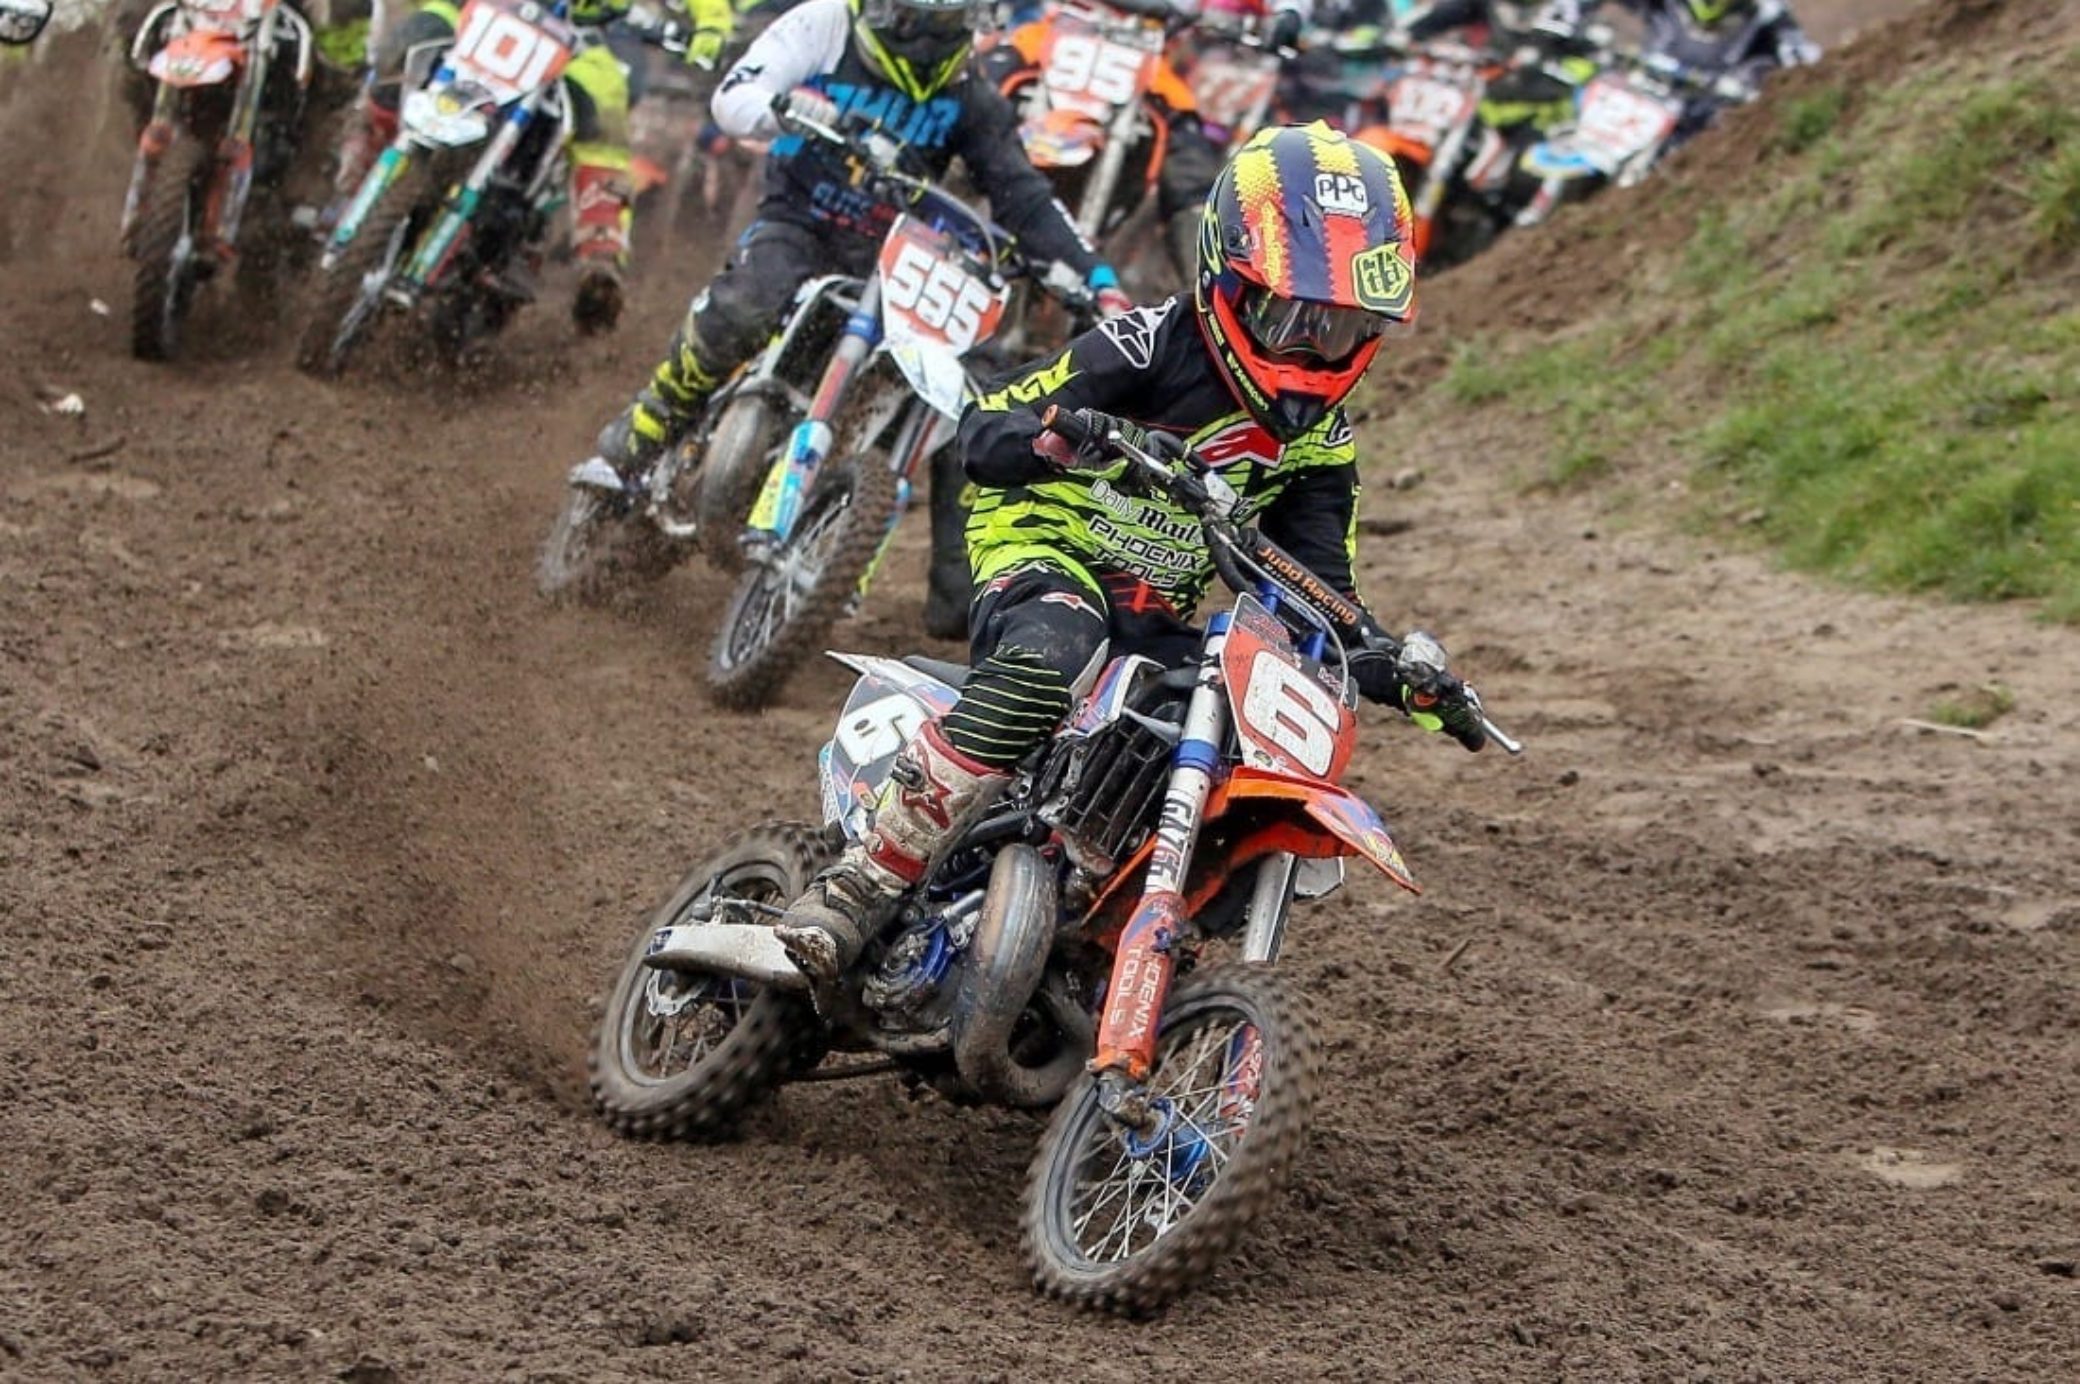 2021 65cc Class British Youth Championship Motocross Dates &amp; Schedule